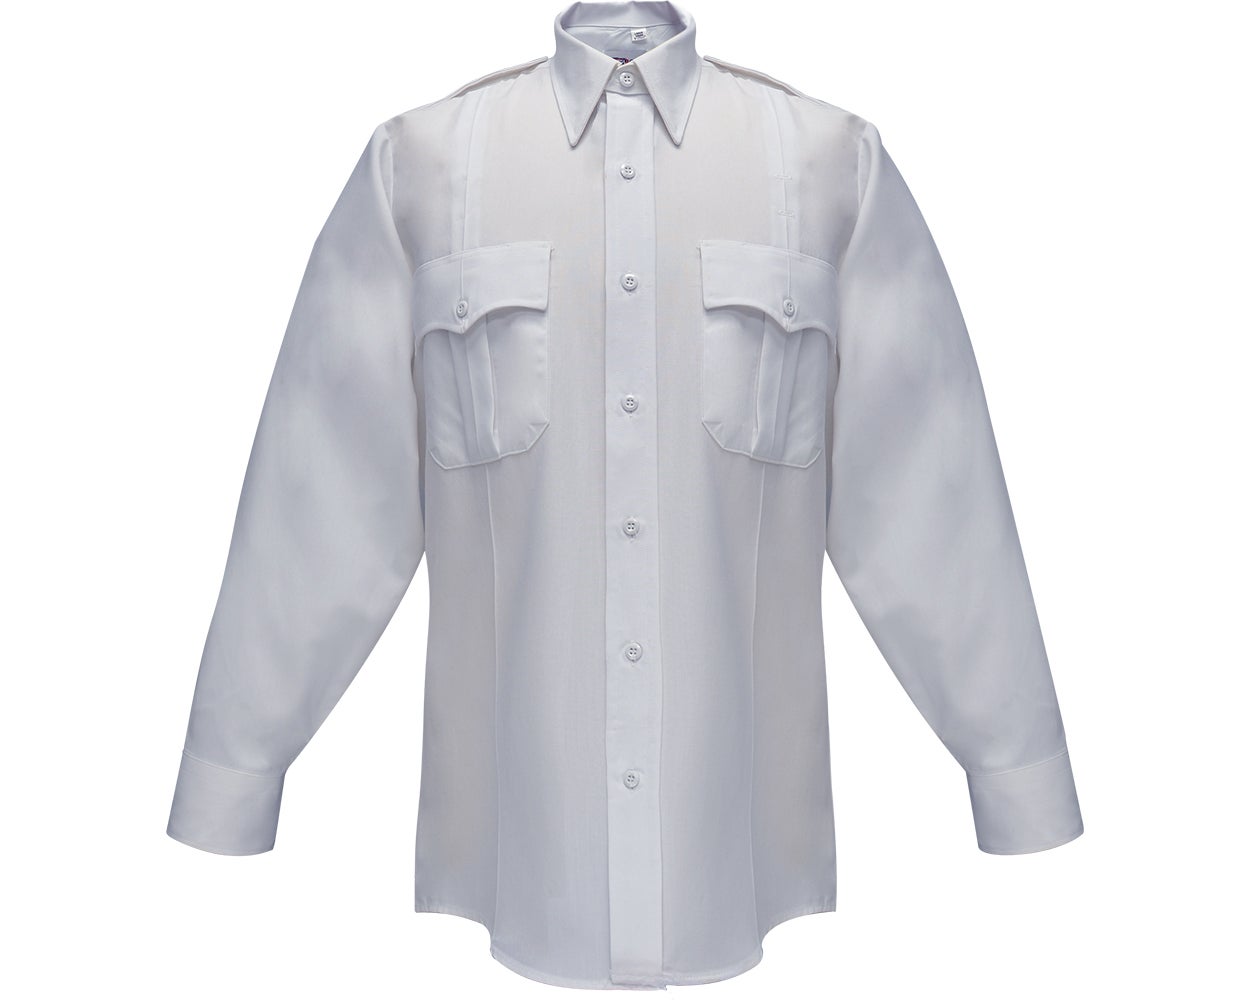 Flying Cross Men's Command 100% Polyester Long Sleeve Uniform Shirt 35W78 - Clothing & Accessories